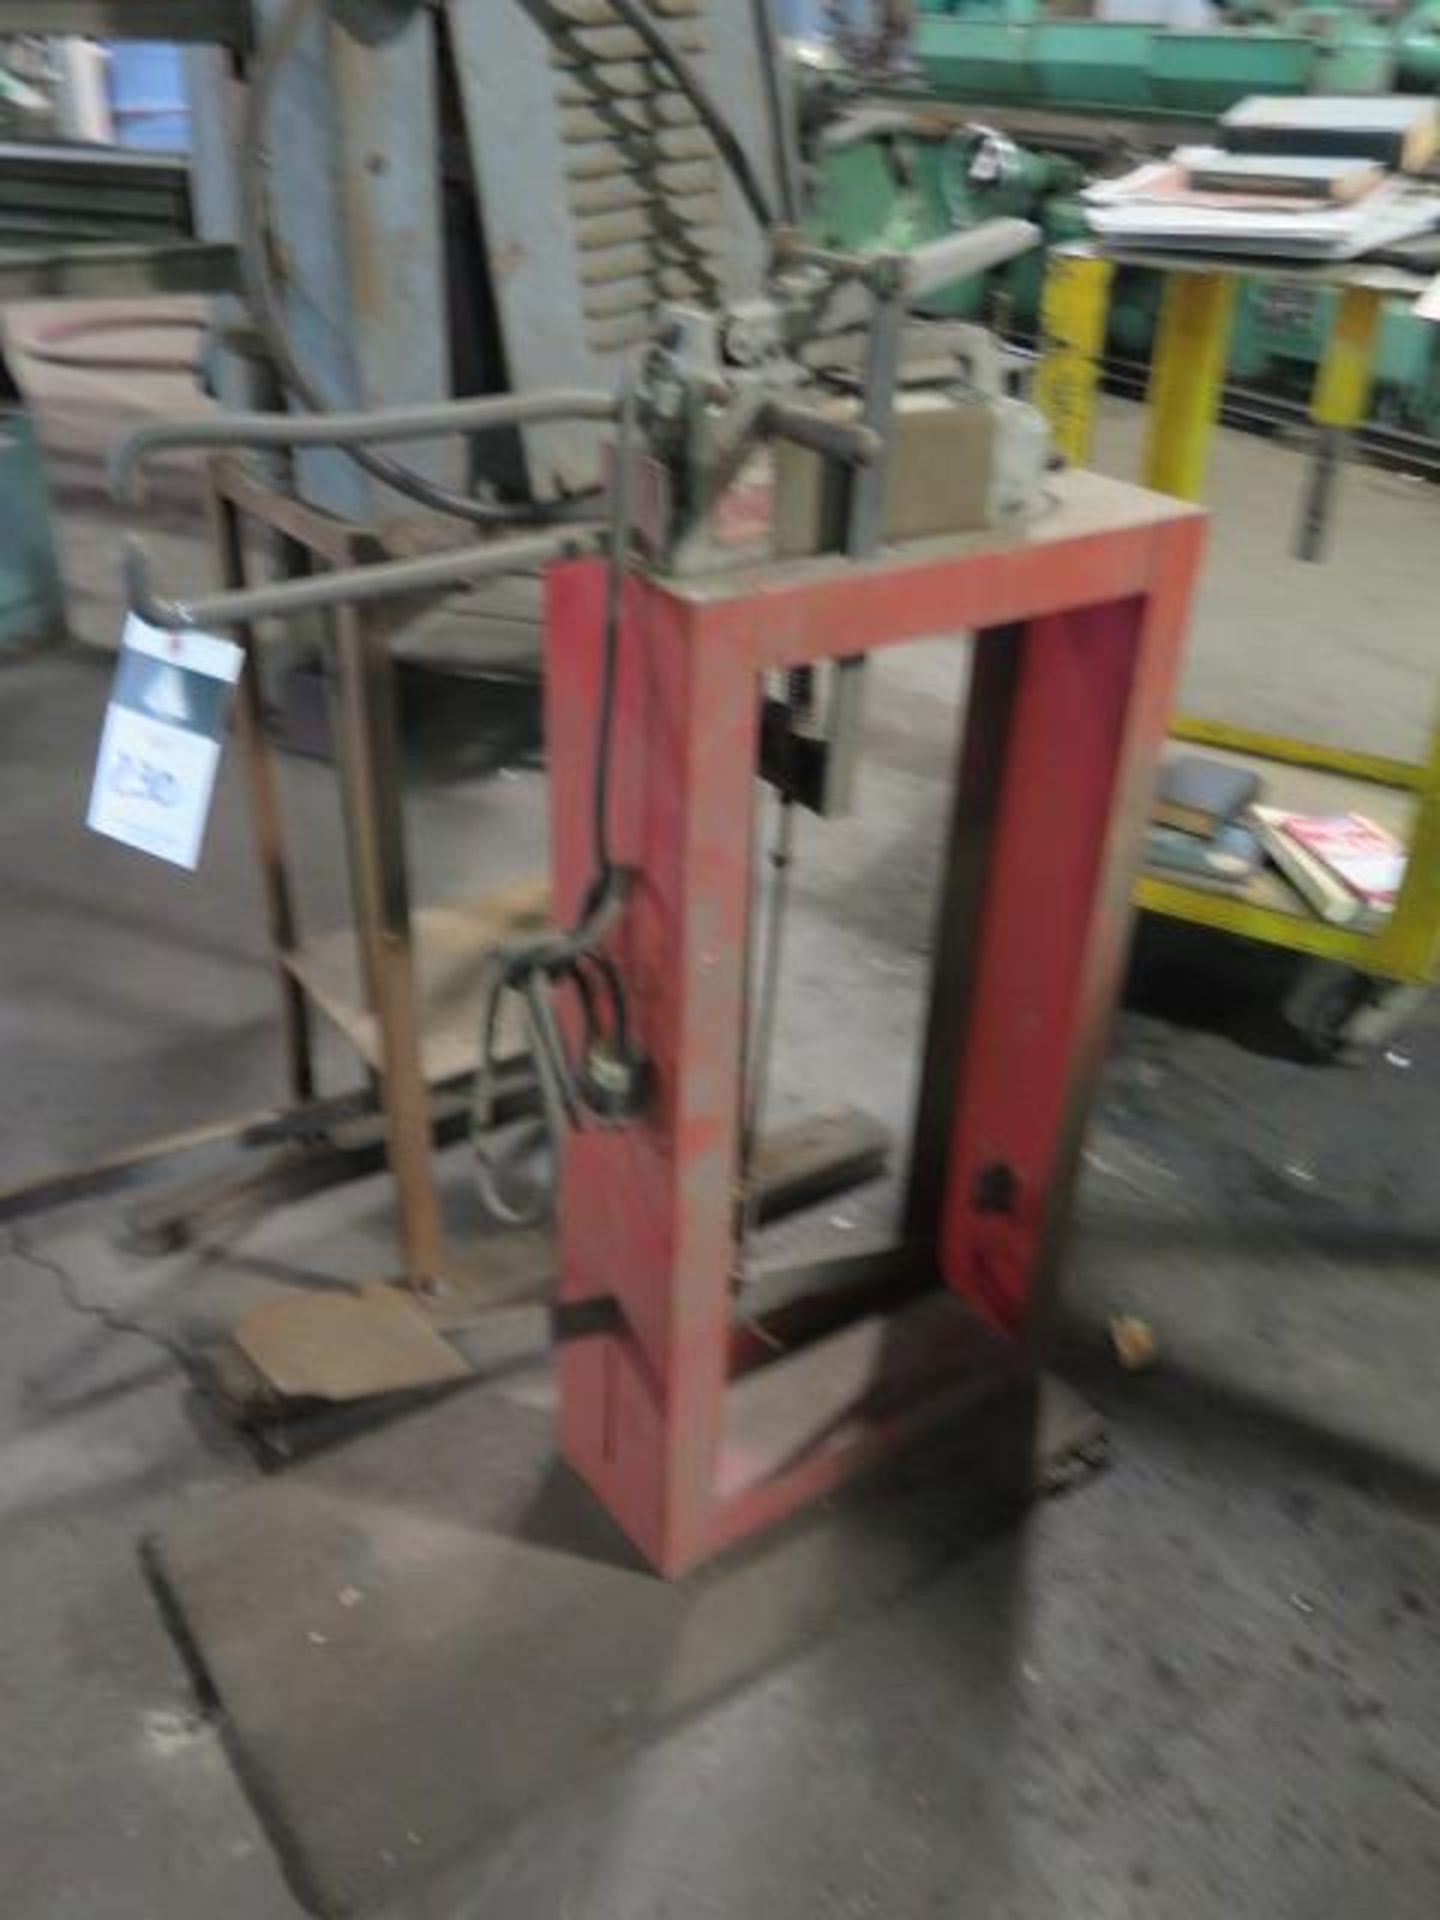 Dayton mdl. 22544 1.5kVA Portable Spot Welder w/ Stand (SOLD AS-IS - NO WARRANTY) - Image 2 of 6